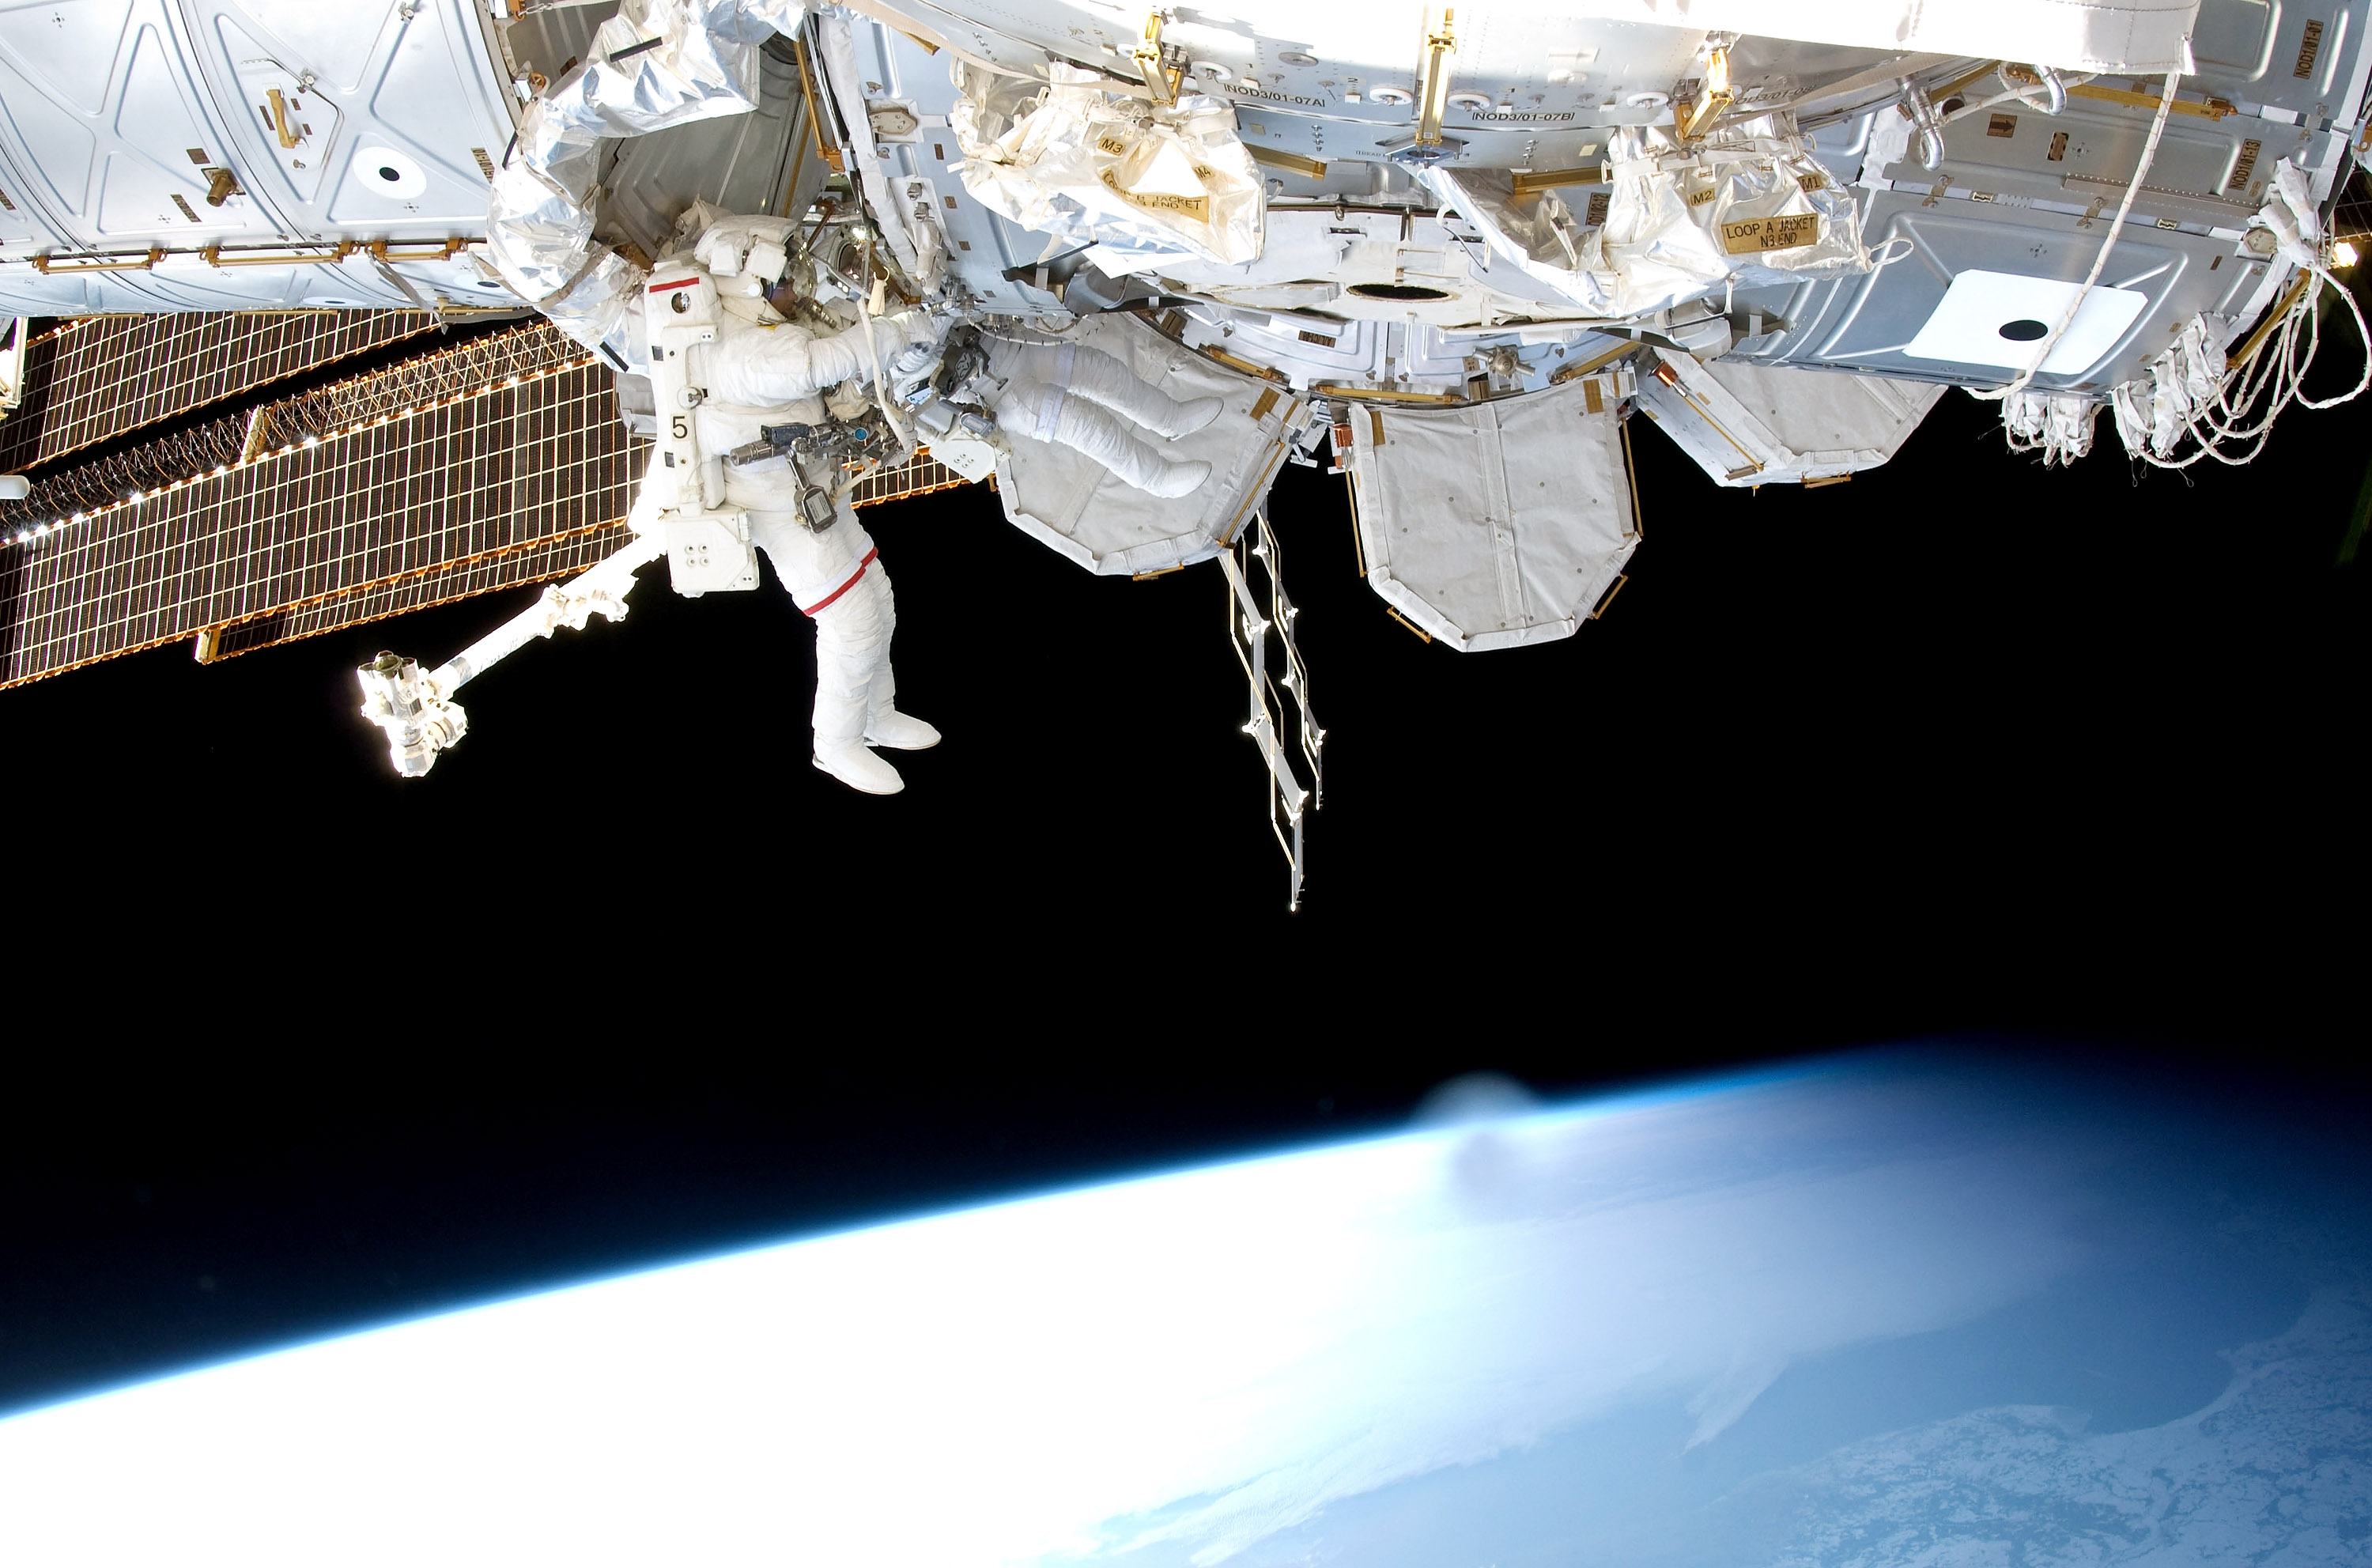 An astronaut doing construction outside the International Space Station while it orbits the Earth.